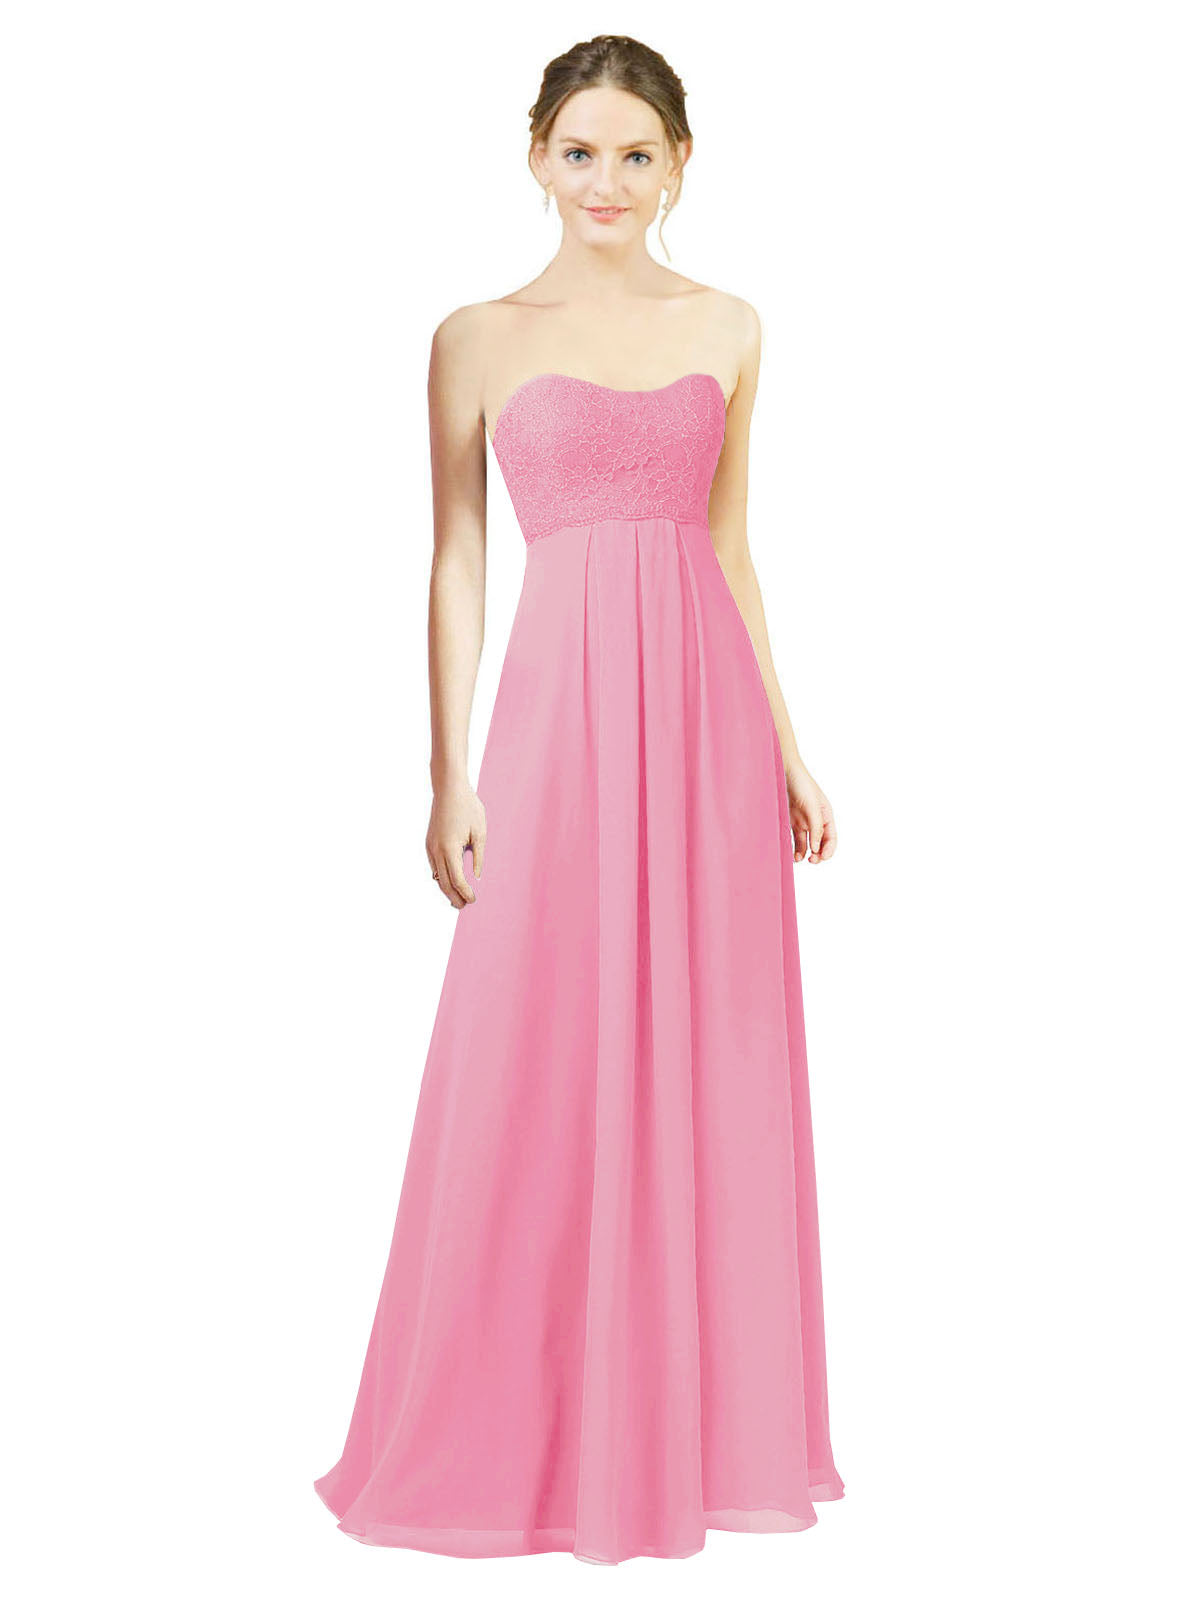 Hot Pink A-Line Sweetheart Strapless Long Bridesmaid Dress Melany